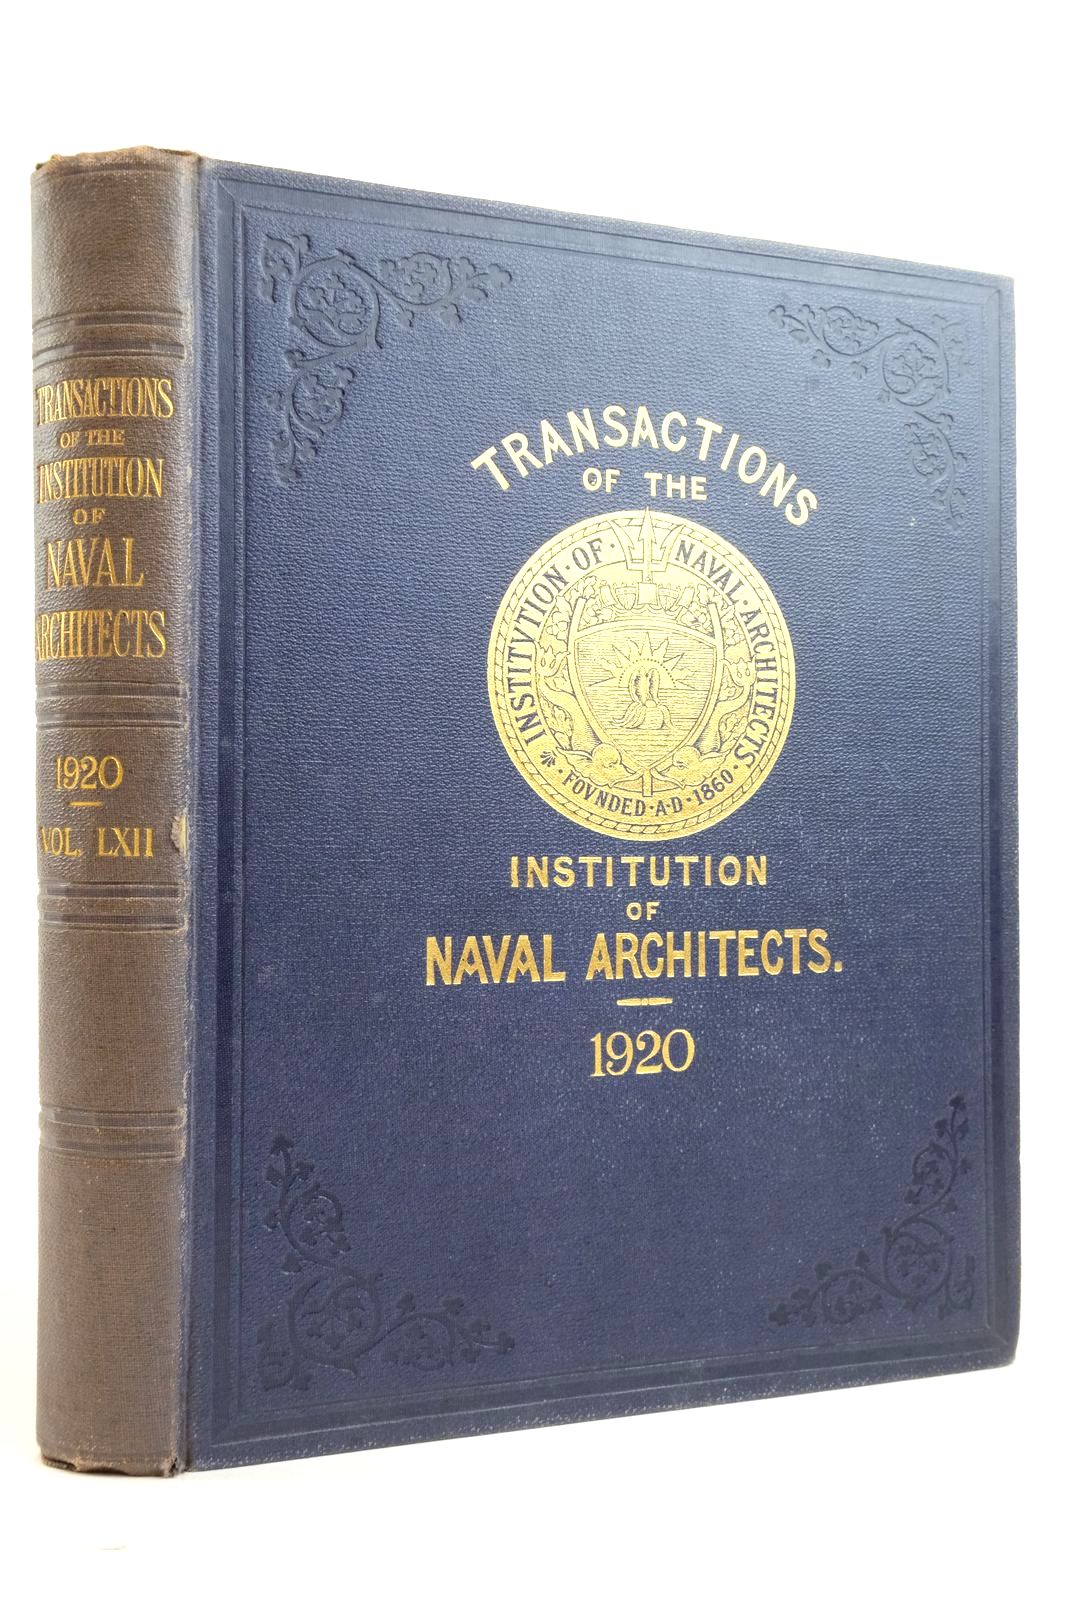 Photo of TRANSACTIONS OF THE INSTITUTION OF NAVAL ARCHITECTS VOLUME LXII written by Dana, R.W. published by Institution Of Naval Architects (STOCK CODE: 2136444)  for sale by Stella & Rose's Books